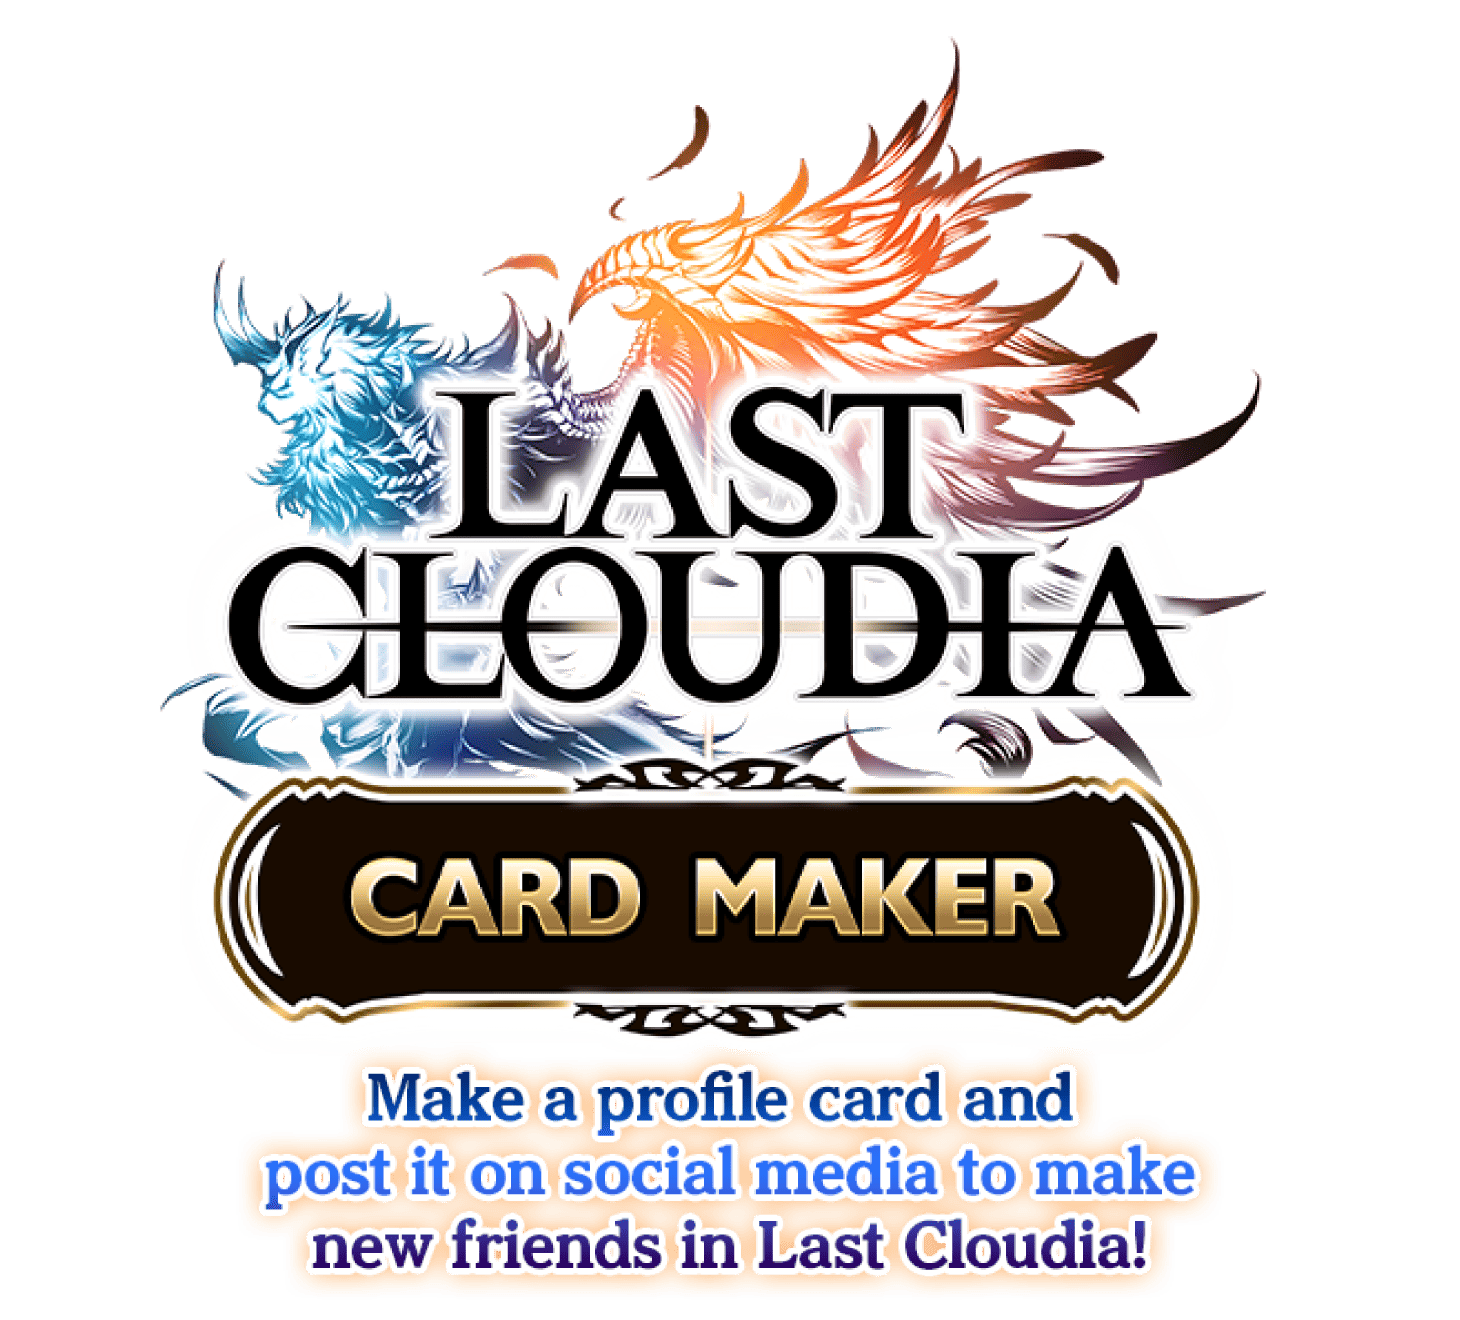 LAST CLOUDIA CARD MAKER Make a profile card and post it on social media to make new friends in Last Cloudia!